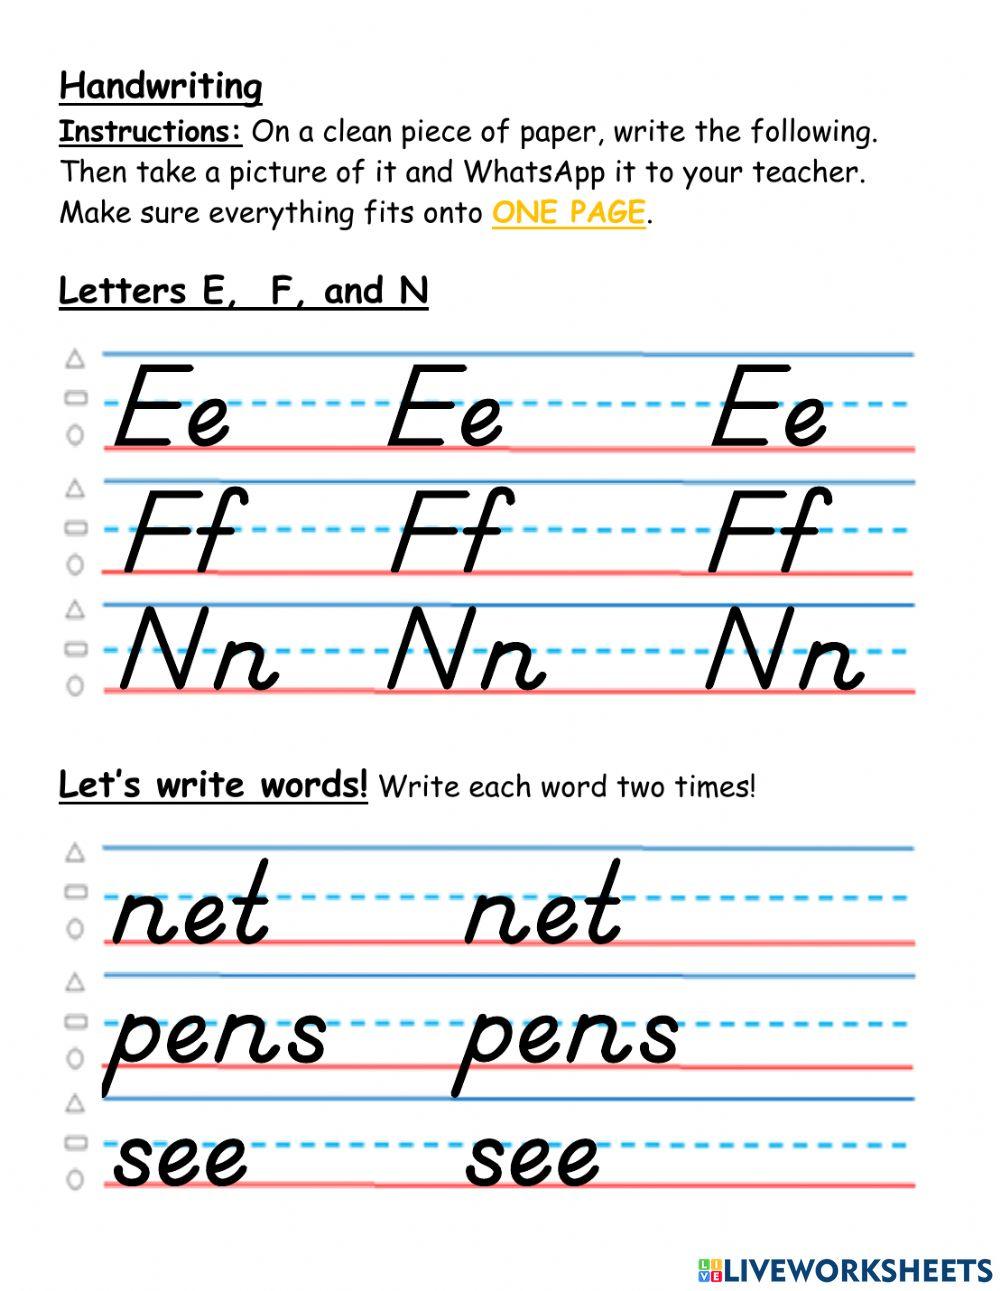 Writing Letters E, F, and N